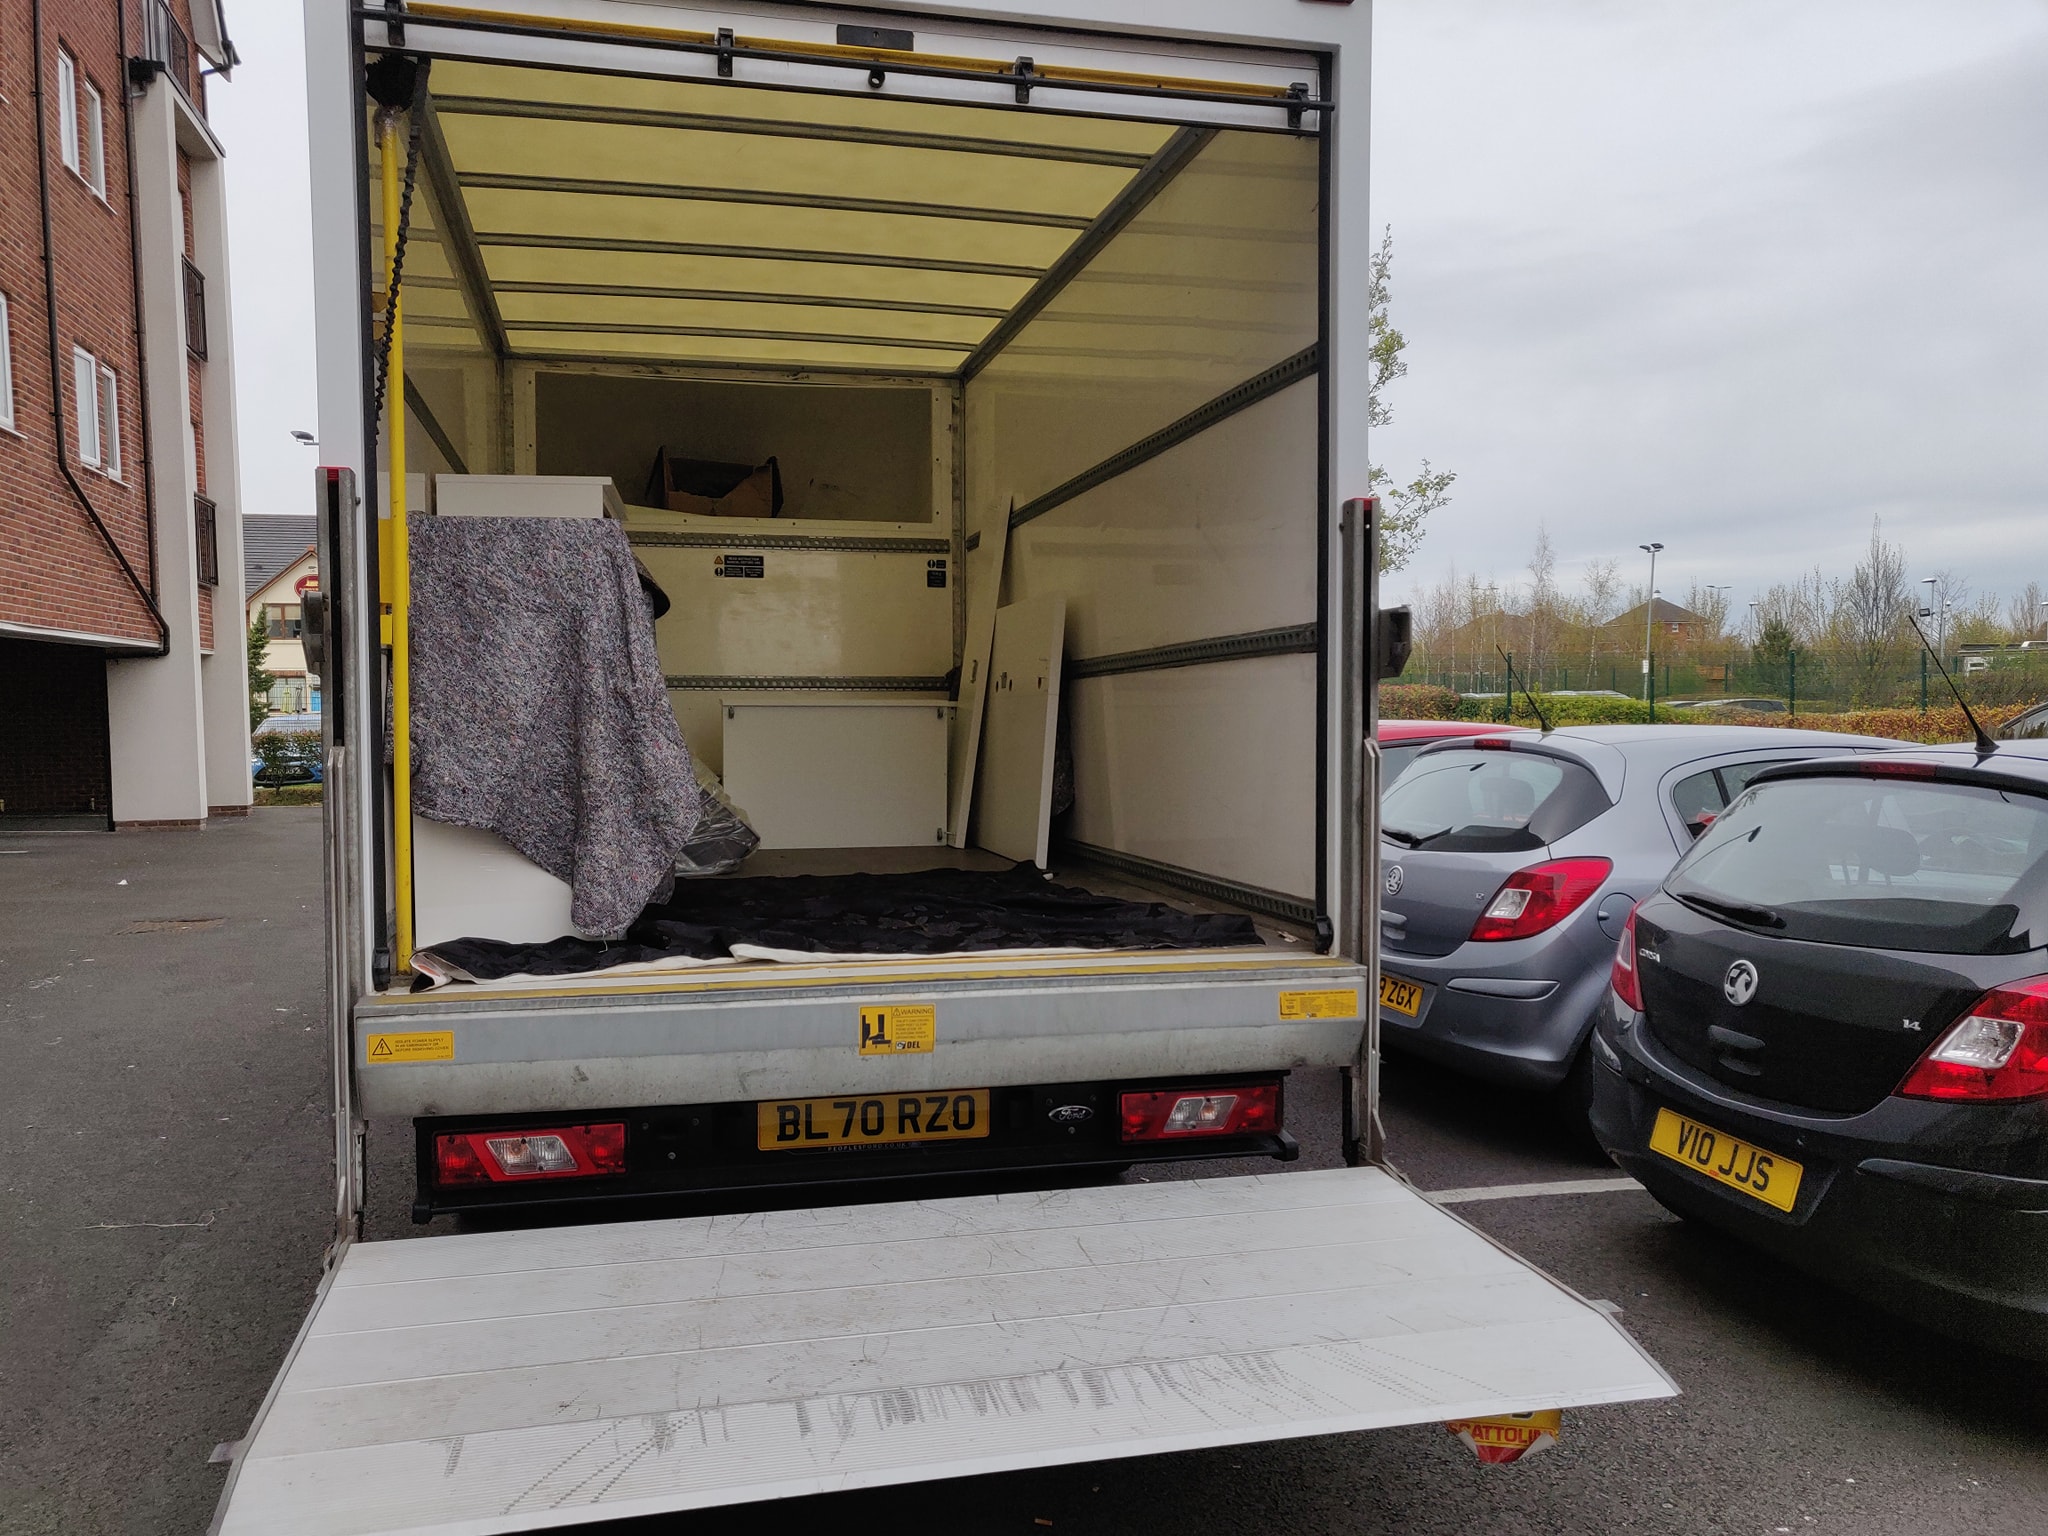 Man and Van removal service in St Helens